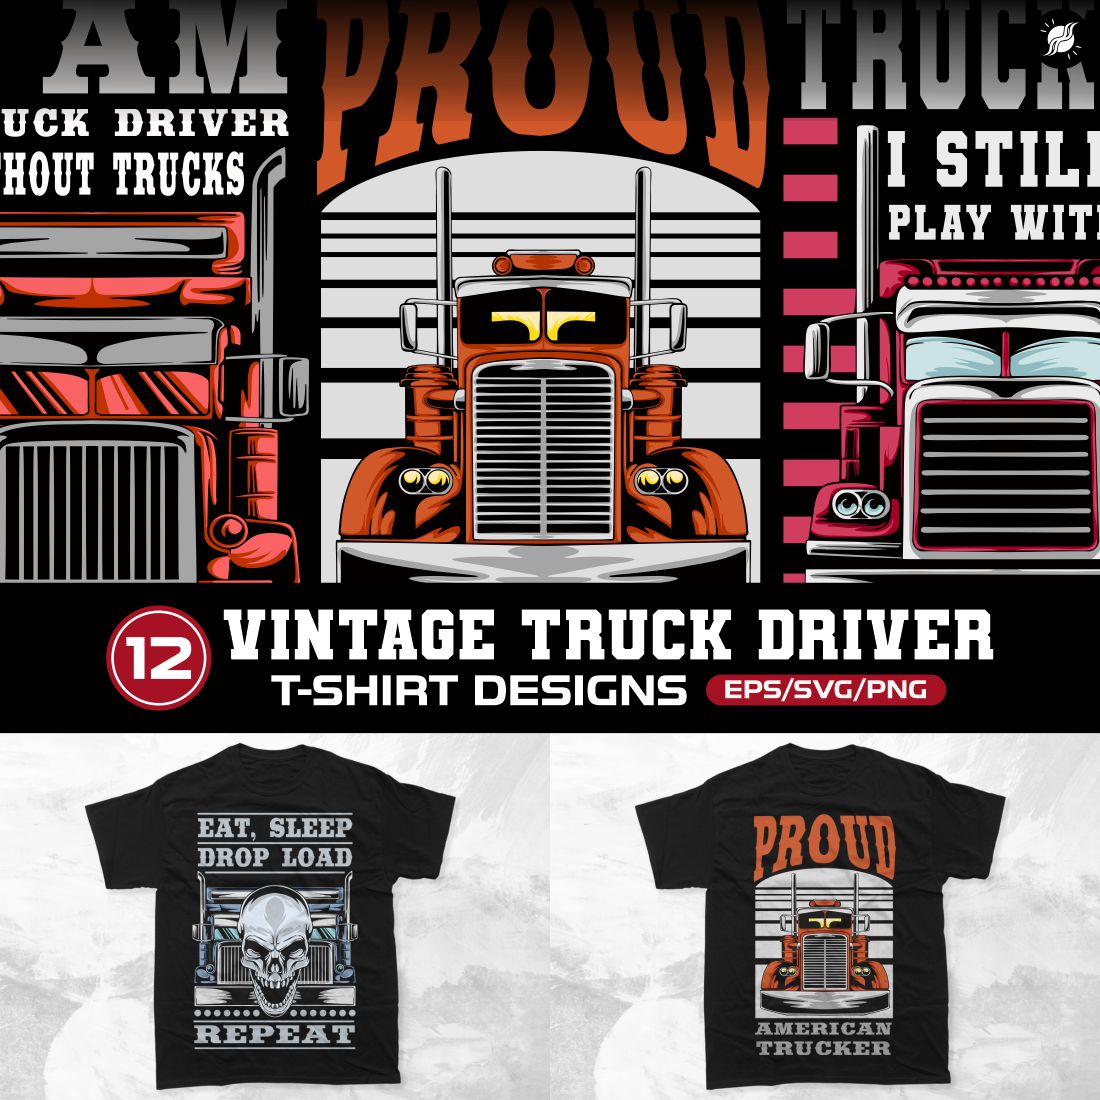 Vintage Truck Driver T-shirt Vector Designs Bundle, American Trucker Graphic T-shirt Collection cover image.